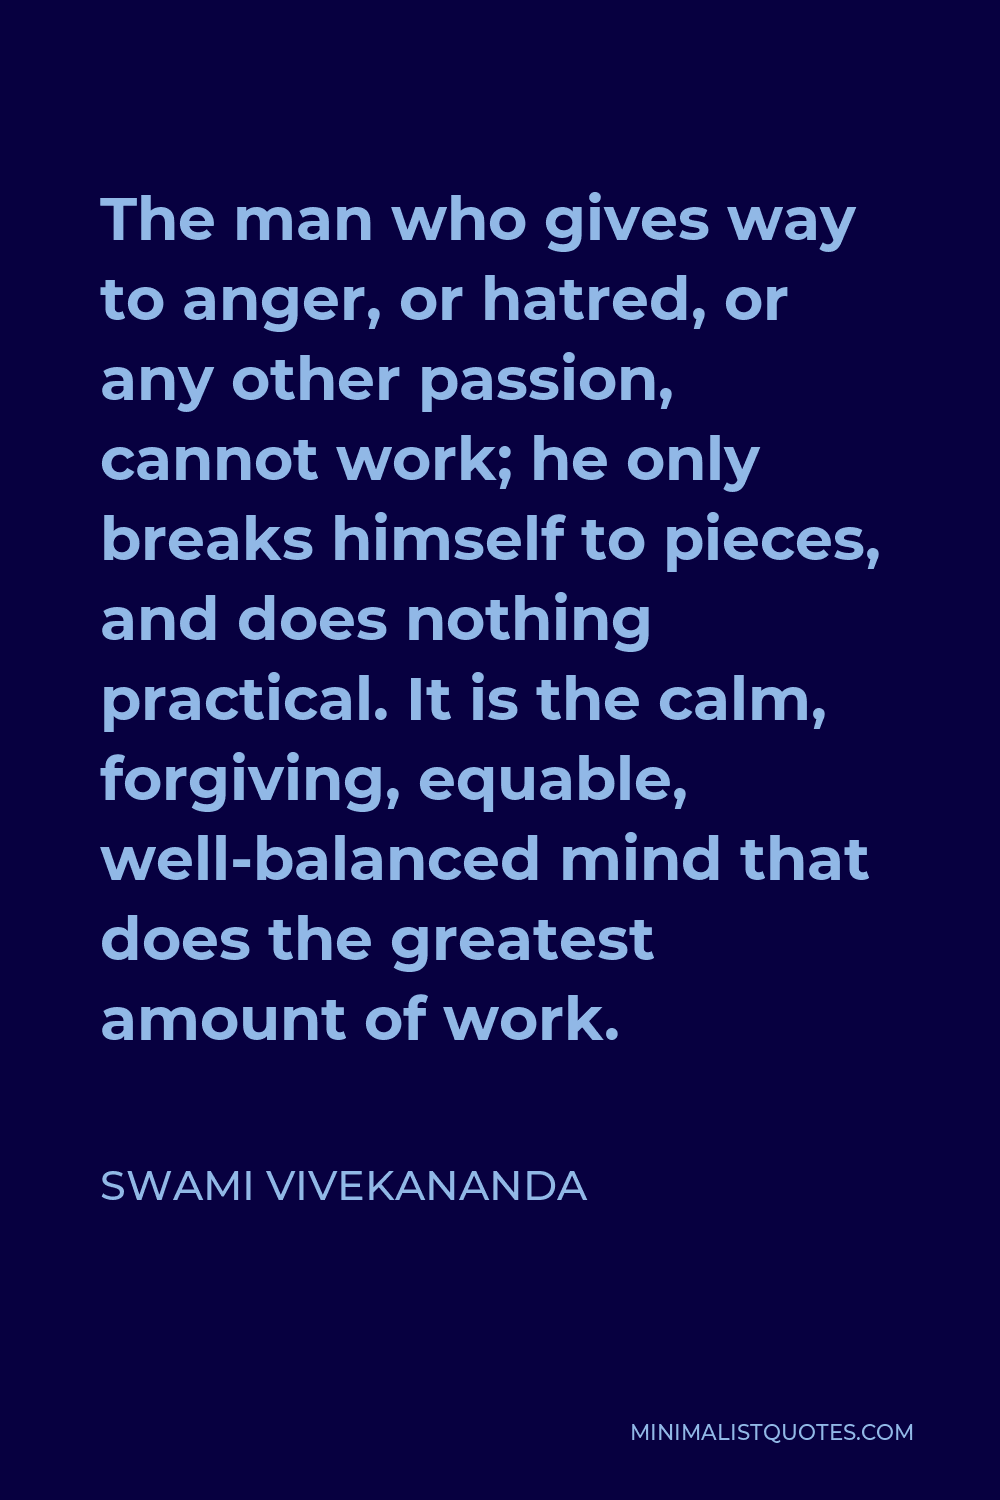 Swami Vivekananda Quote - The man who gives way to anger, or hatred, or any other passion, cannot work; he only breaks himself to pieces, and does nothing practical. It is the calm, forgiving, equable, well-balanced mind that does the greatest amount of work.